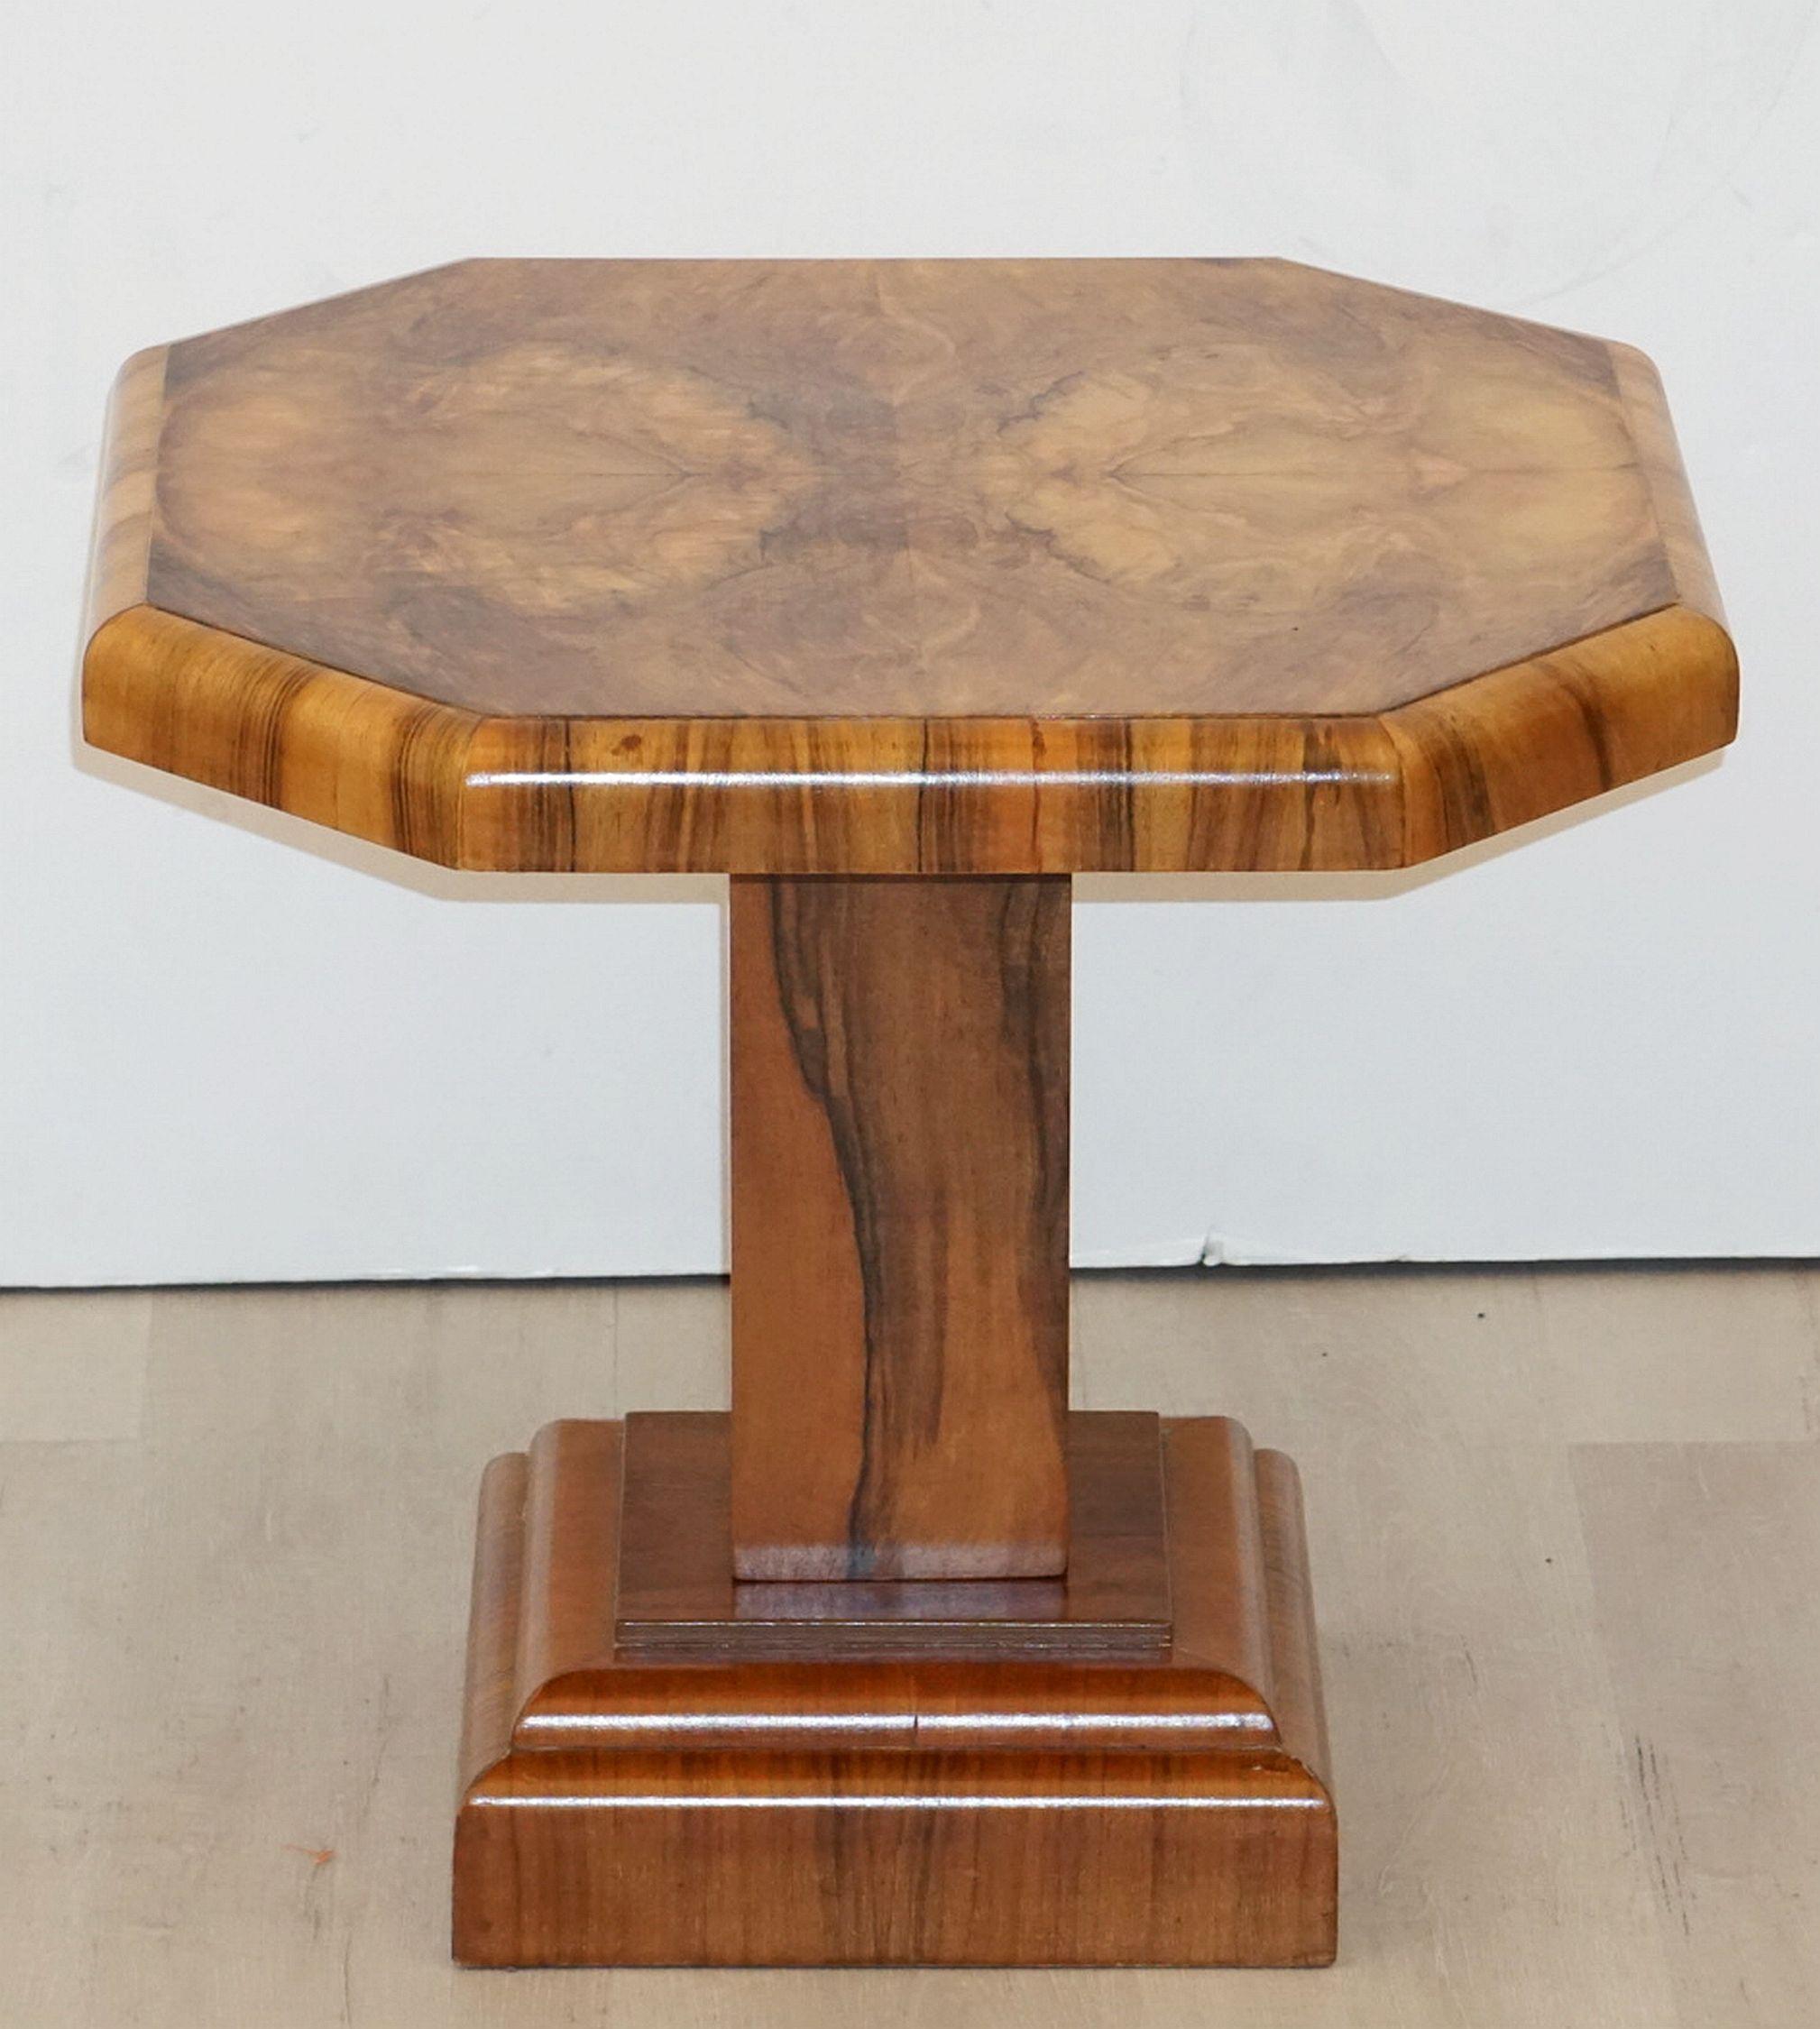 A fine English side table or occasional table from the Art Deco period, circa 1935, featuring an octagonal table top over a square walnut pedestal support and raised base. The whole with lovely figured veneers of burled walnut.